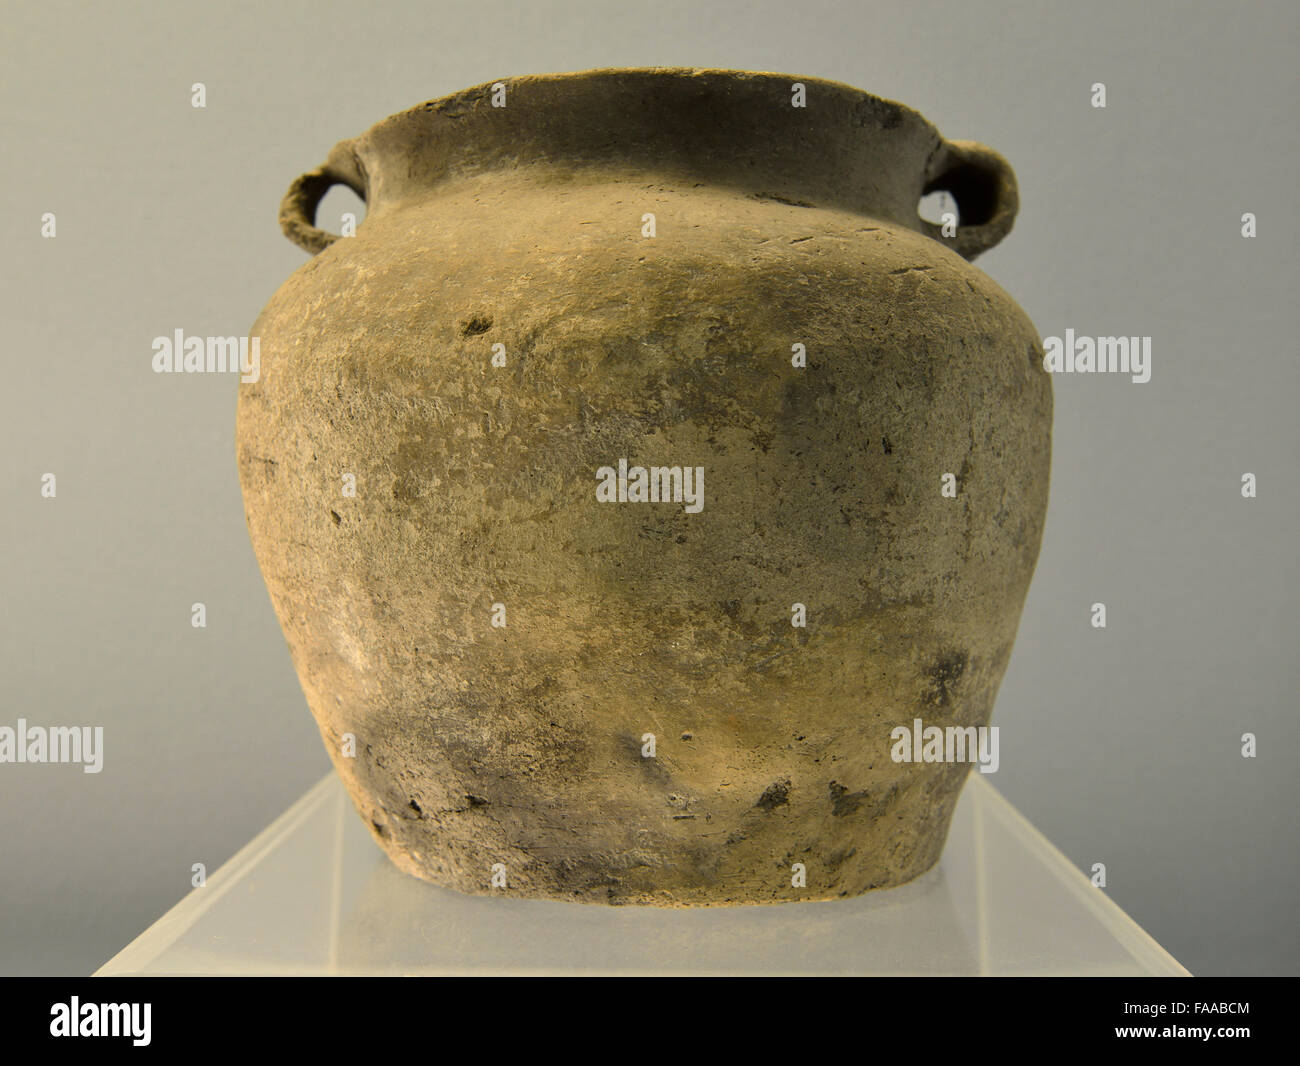 Charcoal-Mixed Black Pottery Jar With Two Ears. Hemudu Culture, ca.4800 B.C. Shanghai Museum. Stock Photo